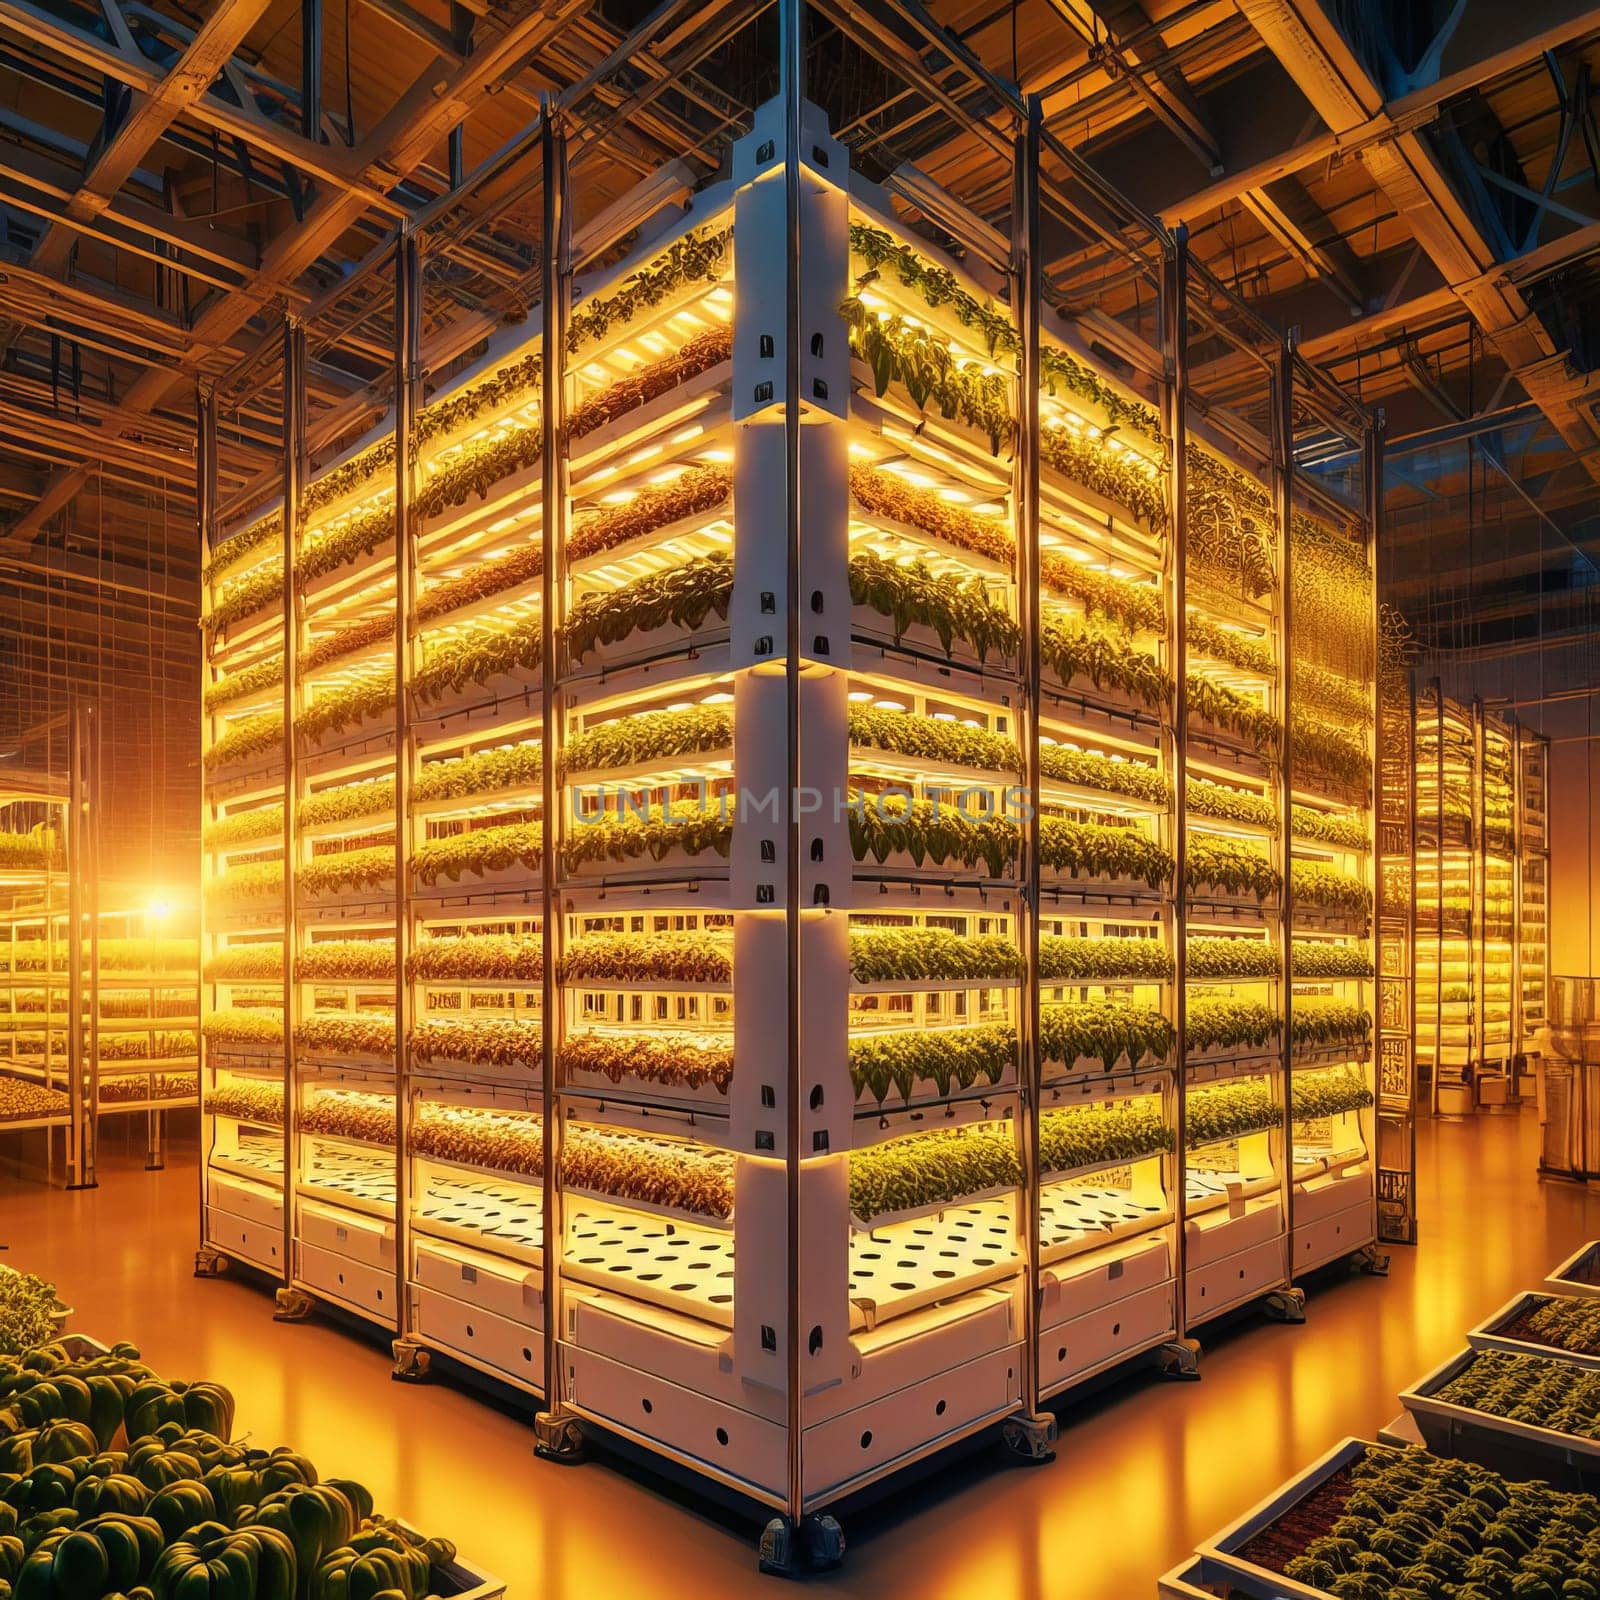 A spacious warehouse constructed with hardwood beams and glass walls, filled with symmetrical shelves stocked with plants and pet supplies